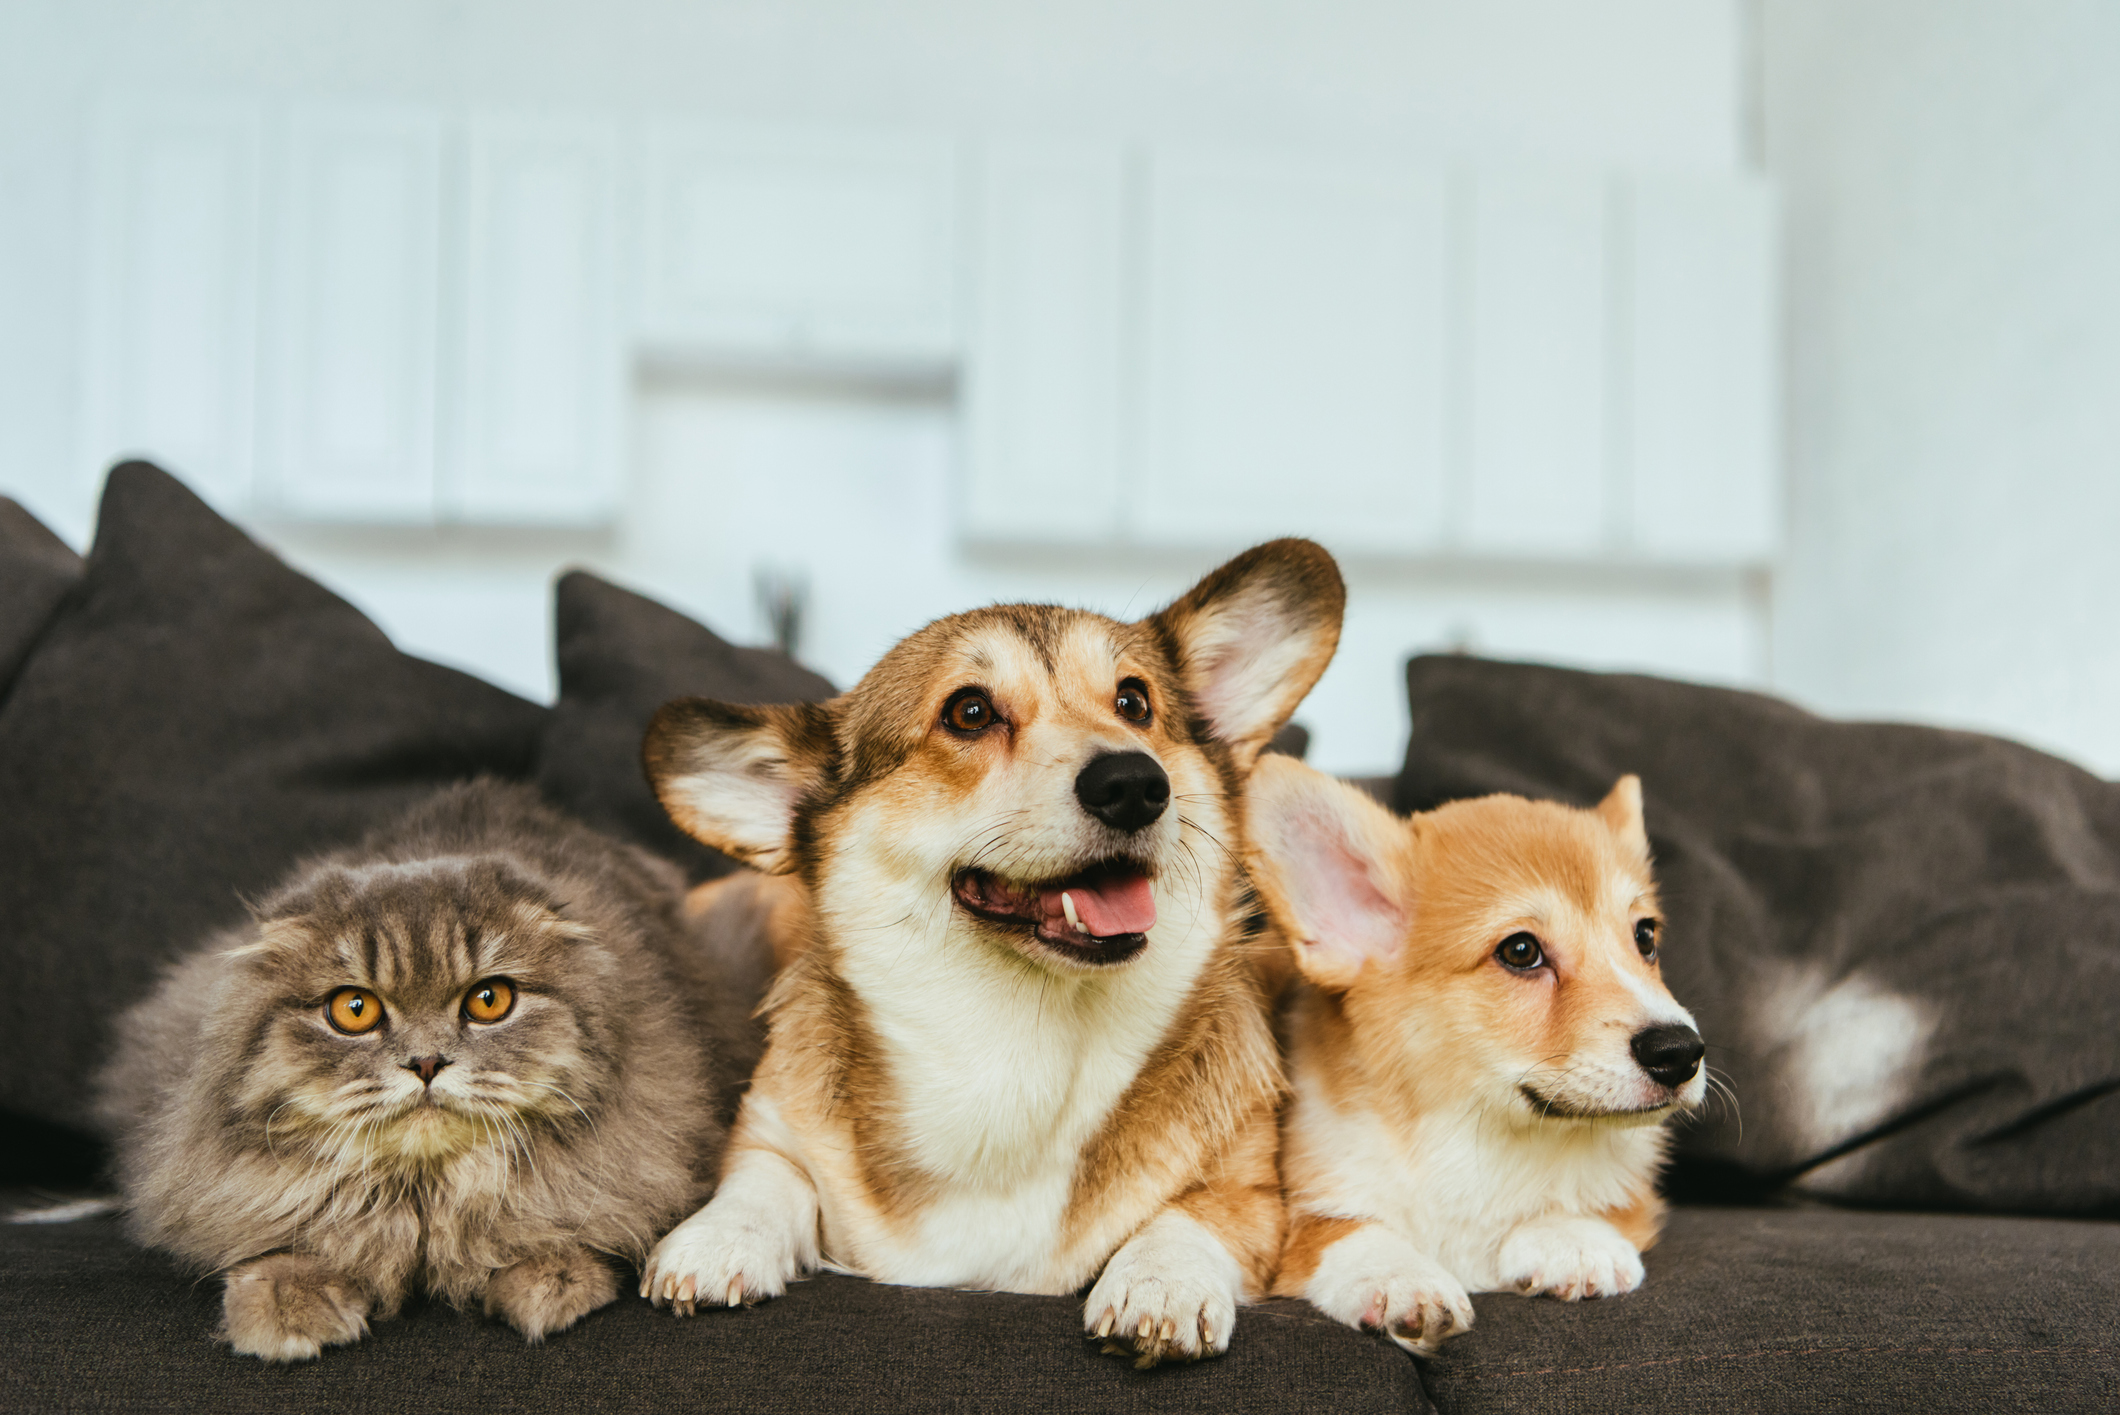 Cat and two dogs laying on sofa.